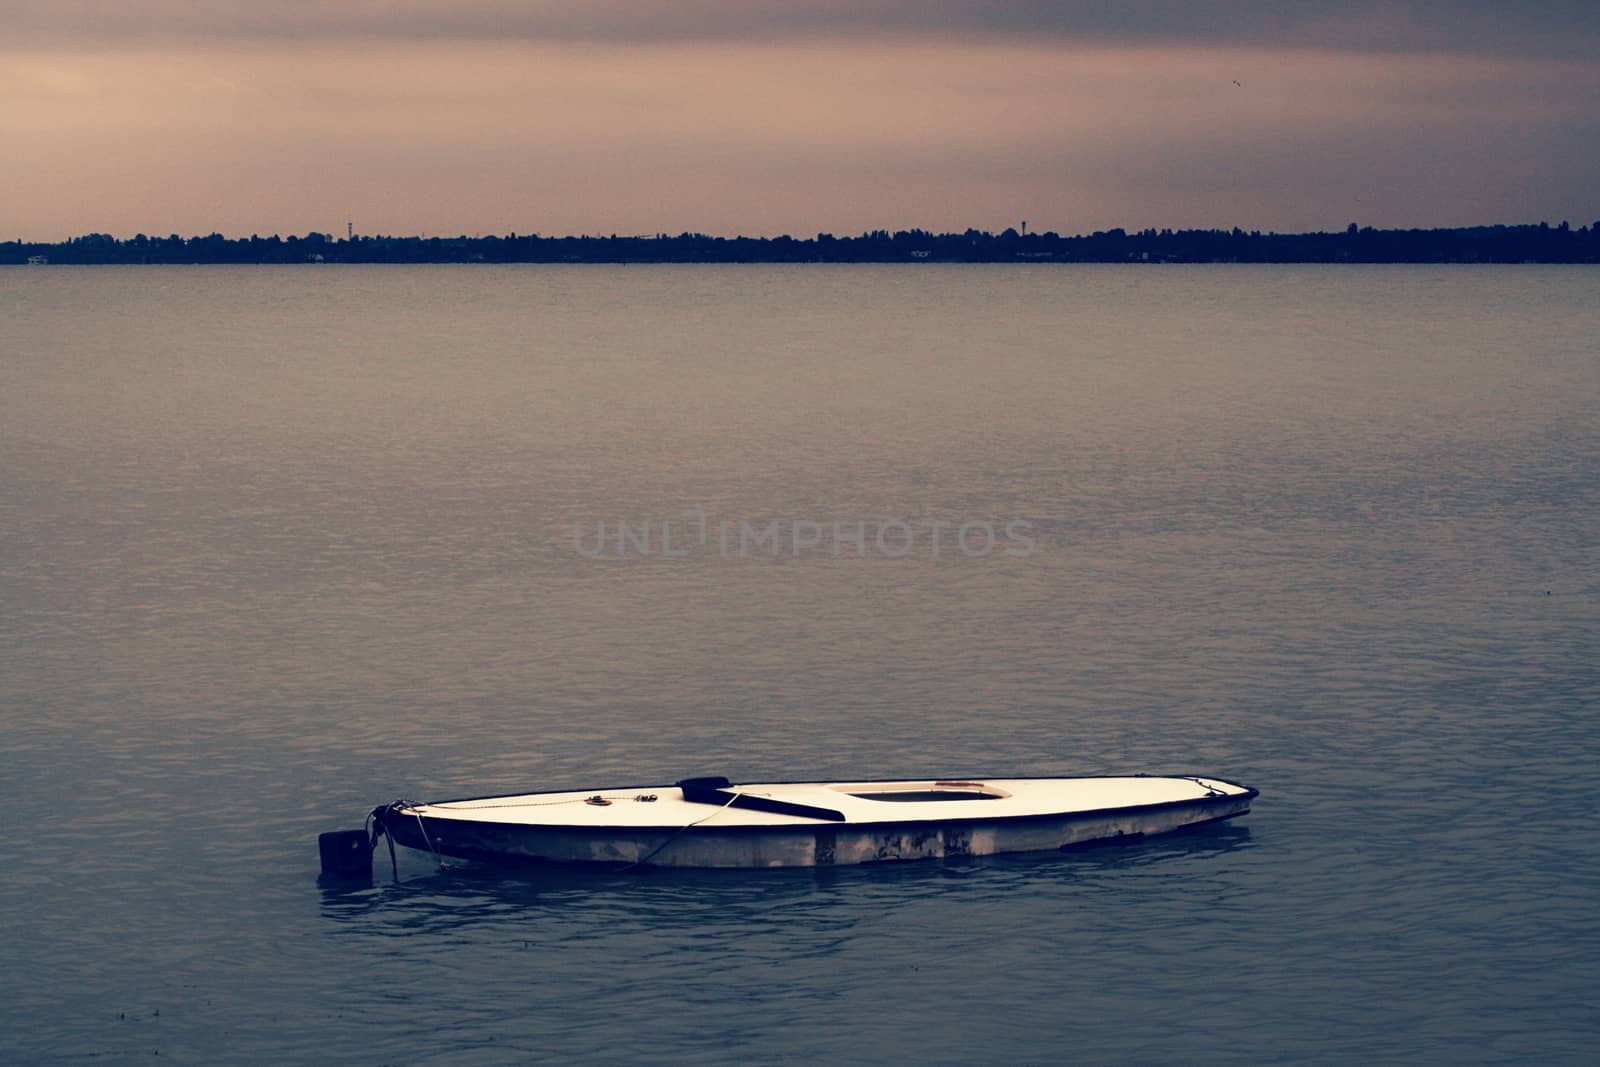 A small boat in a large body of water. High quality photo